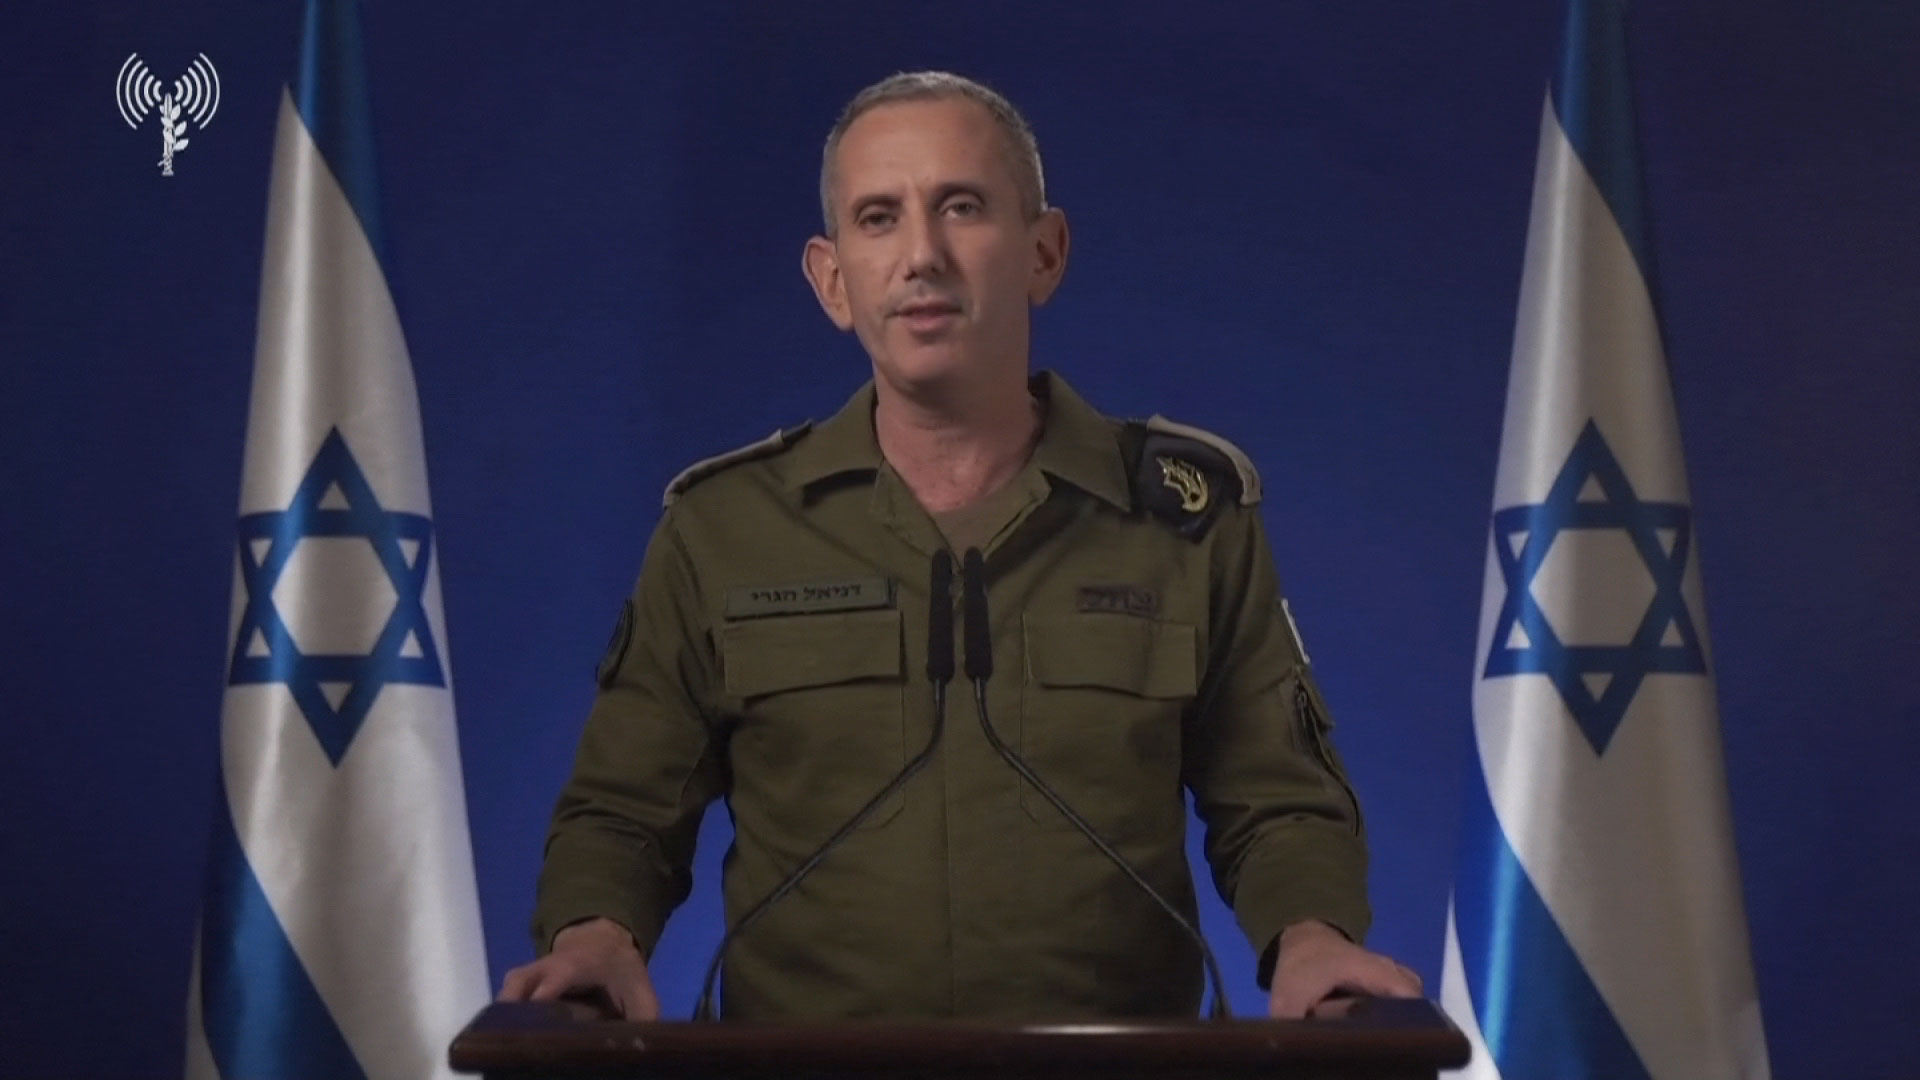 Israel Defense Forces spokesperson Daniel Hagari gives a statement from Tel Aviv, Israel, early Sunday, local time.